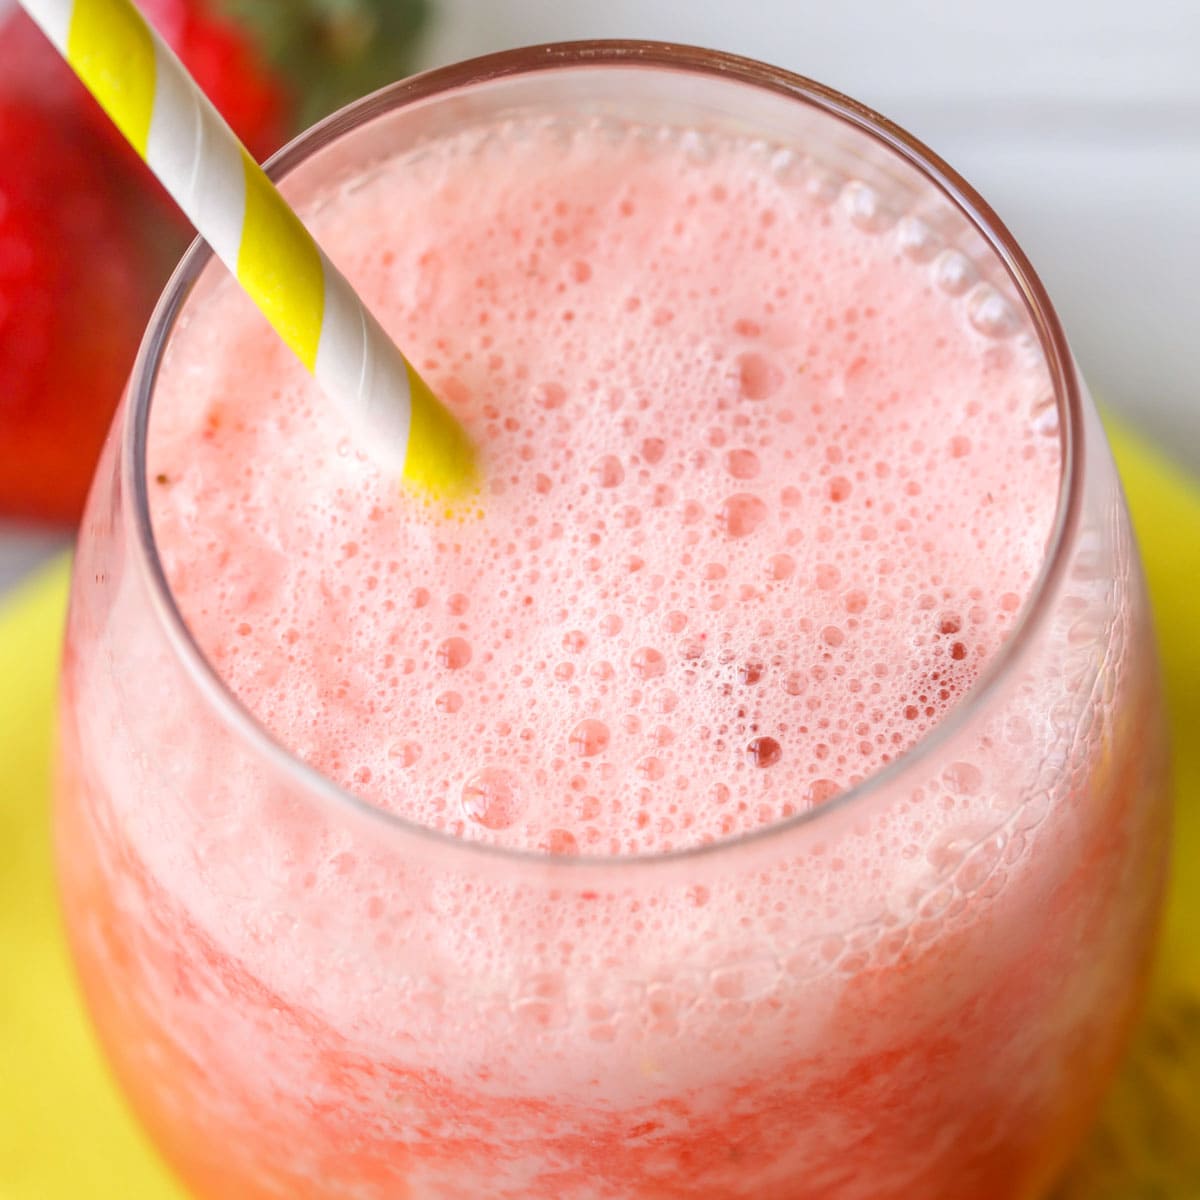 Frozen strawberry lemonade served in a glass with a yellow straw.